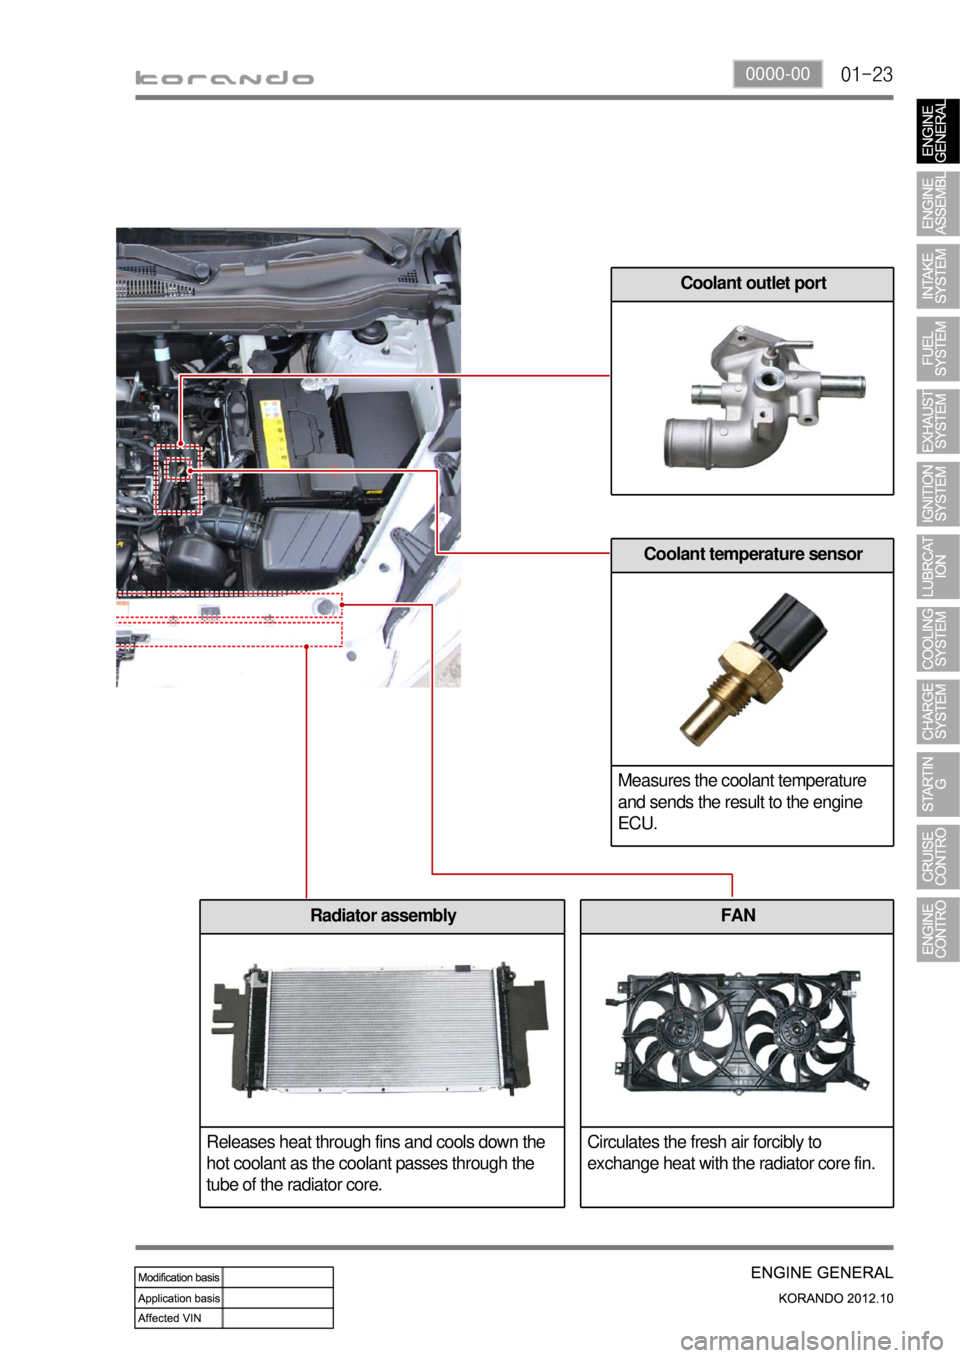 SSANGYONG KORANDO 2012  Service Manual 01-230000-00
Coolant outlet port
Coolant temperature sensor
Measures the coolant temperature 
and sends the result to the engine 
ECU.
Radiator assembly
Releases heat through fins and cools down the 
